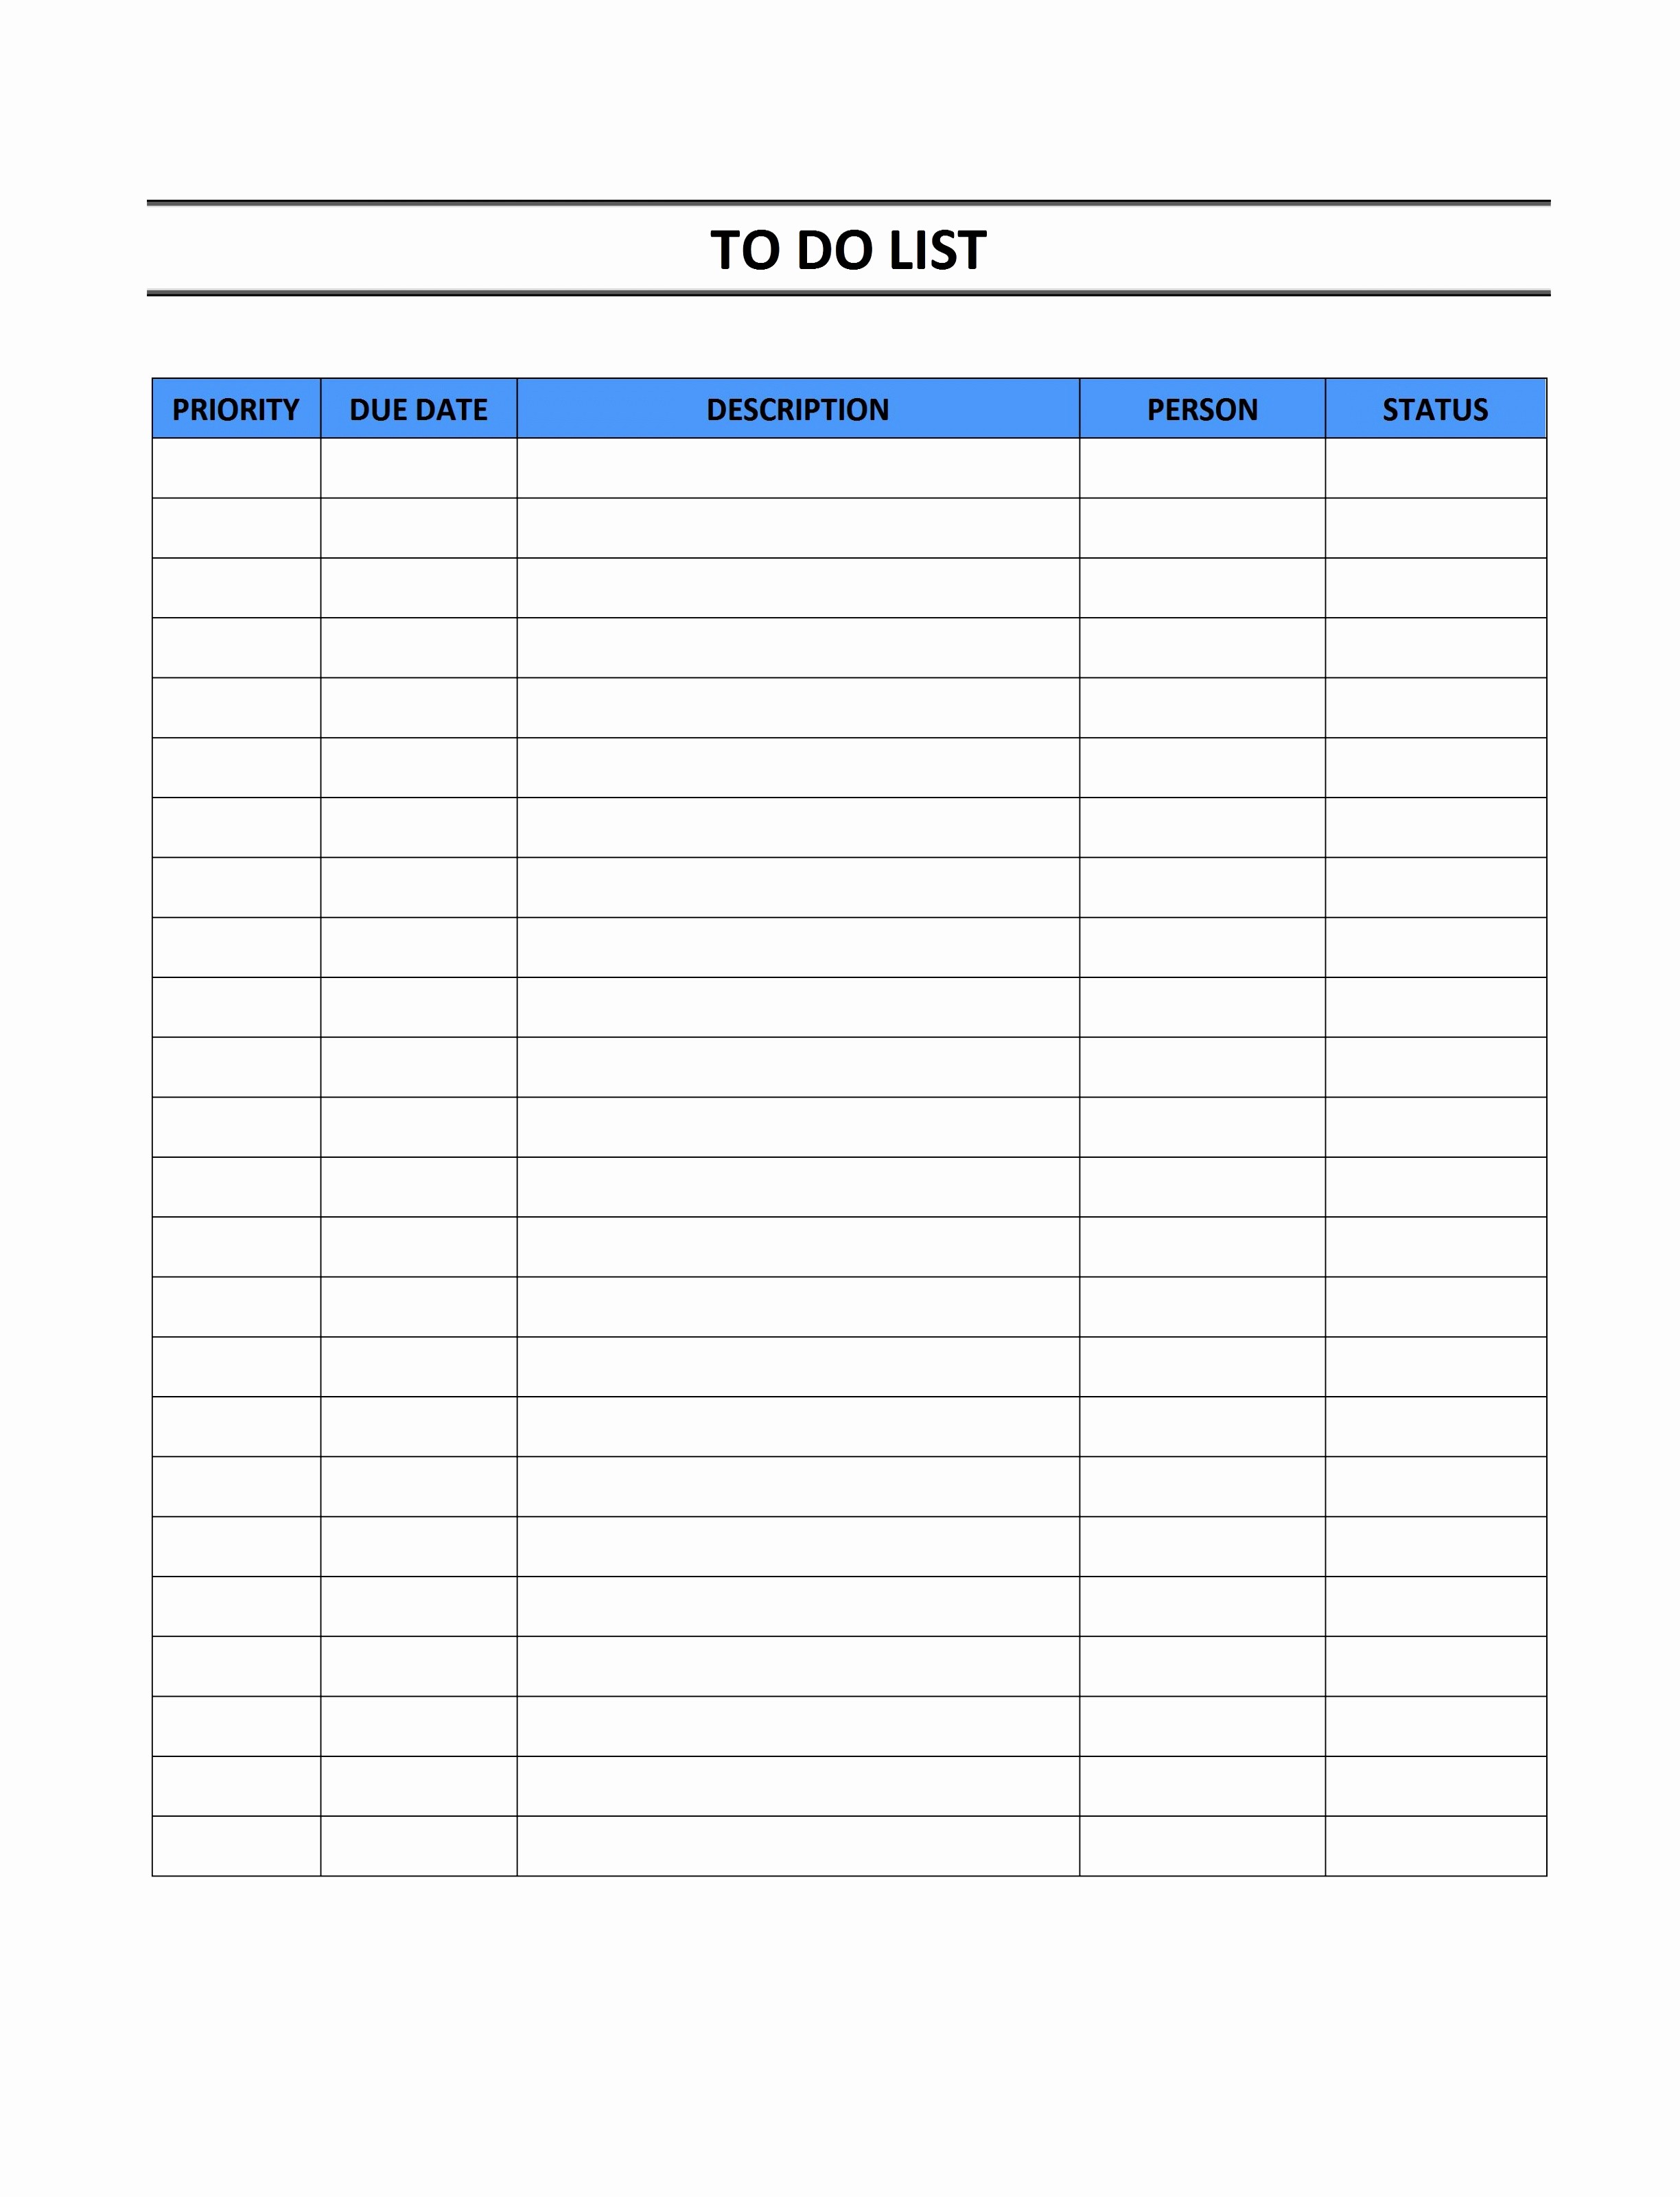 To Do List Word Doc Unique 10 Free to Do List Template for Word Trita